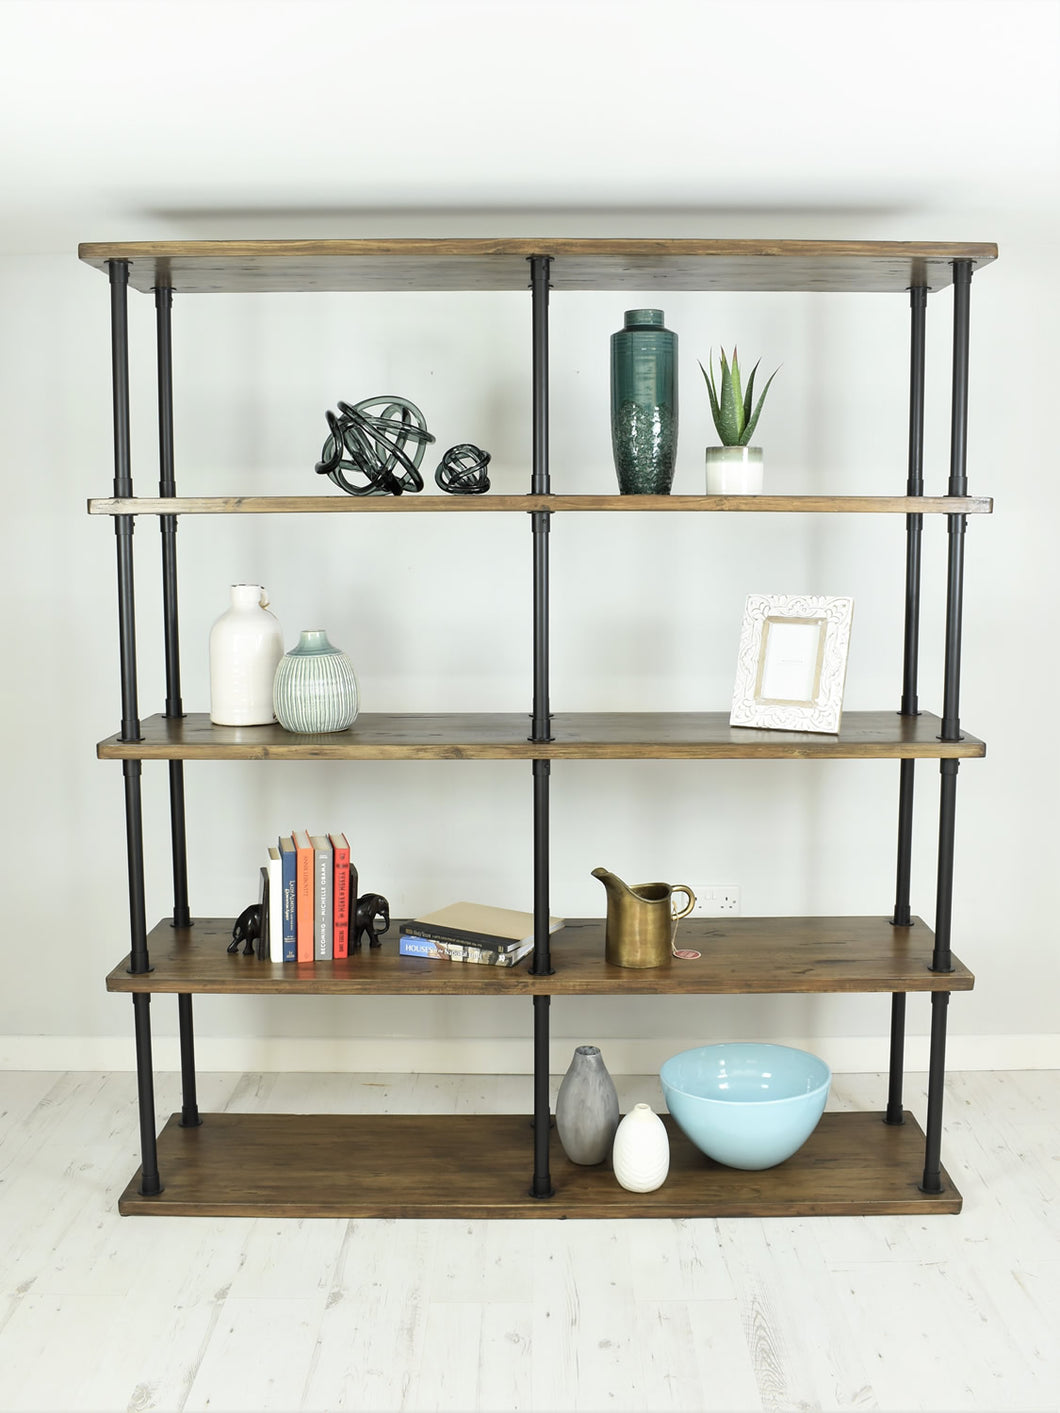 Vintage industrial style shelving unit. Items displayed on shelves.